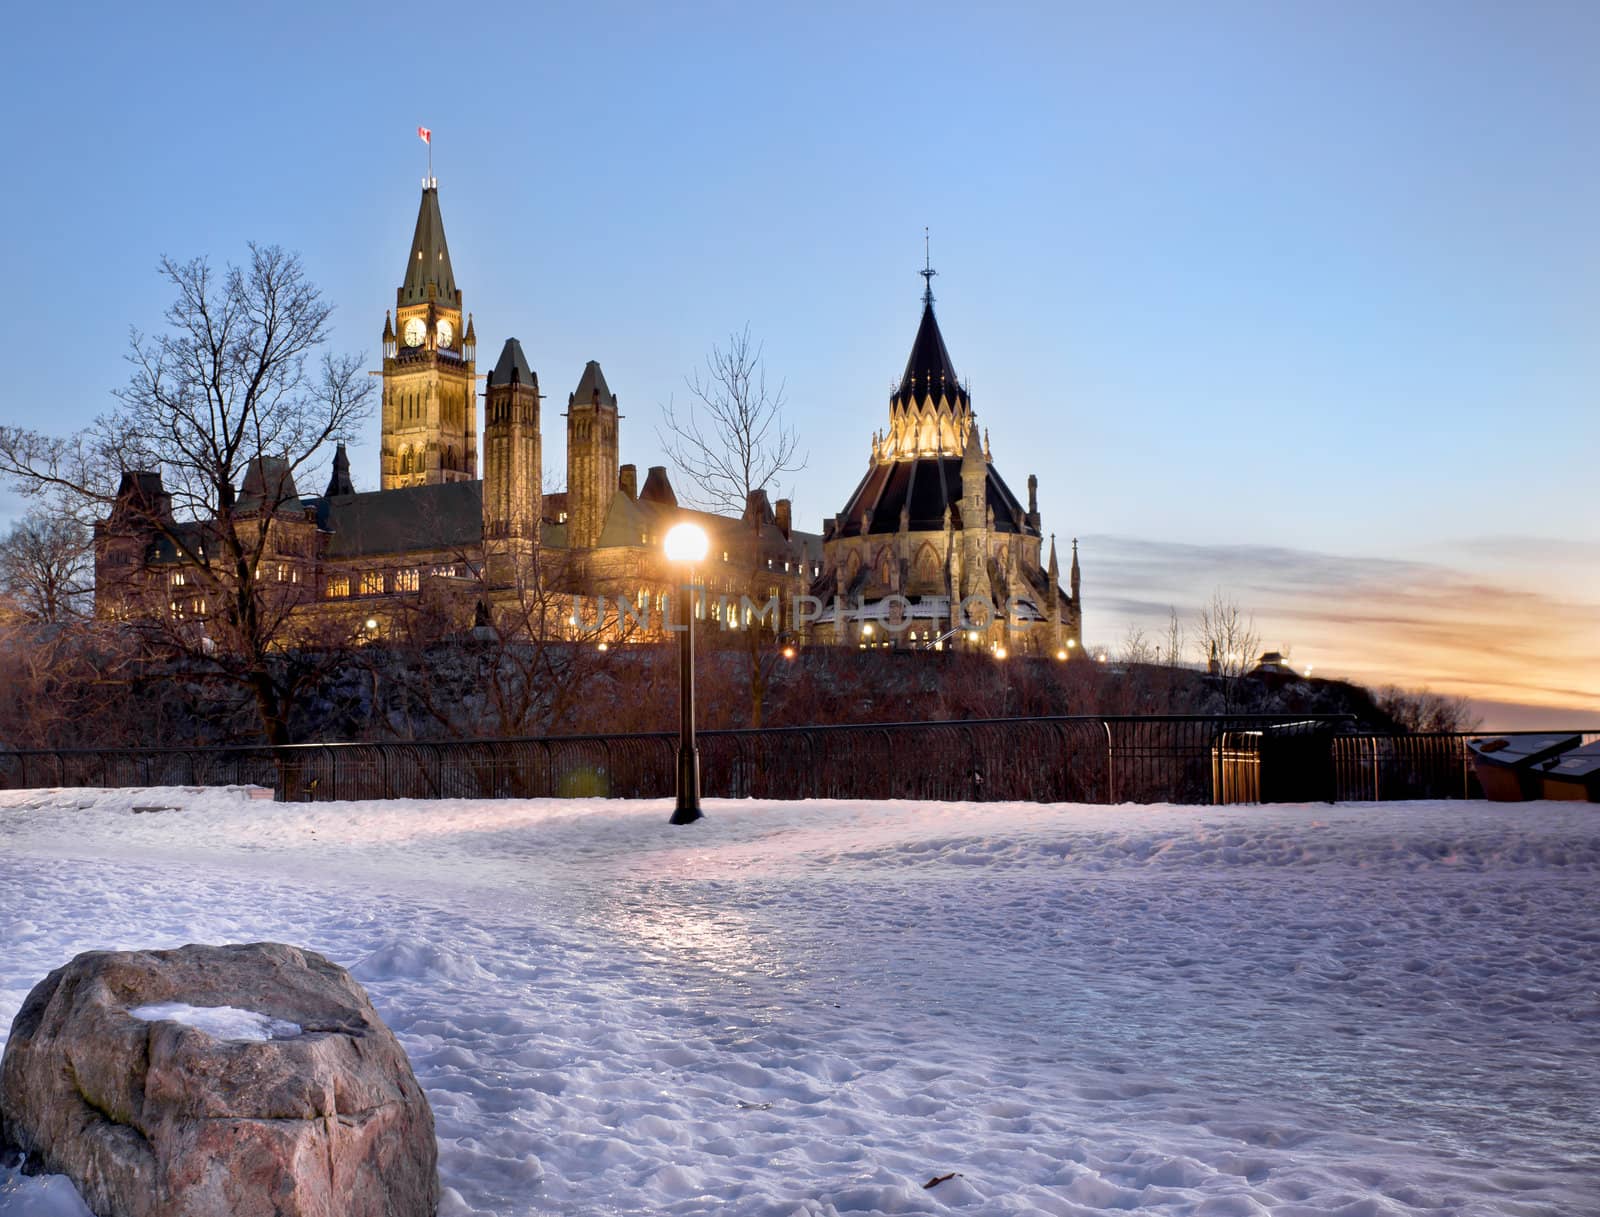 The Canadian Parliament in winter, seen from Major's Hill Park in Ottawa.